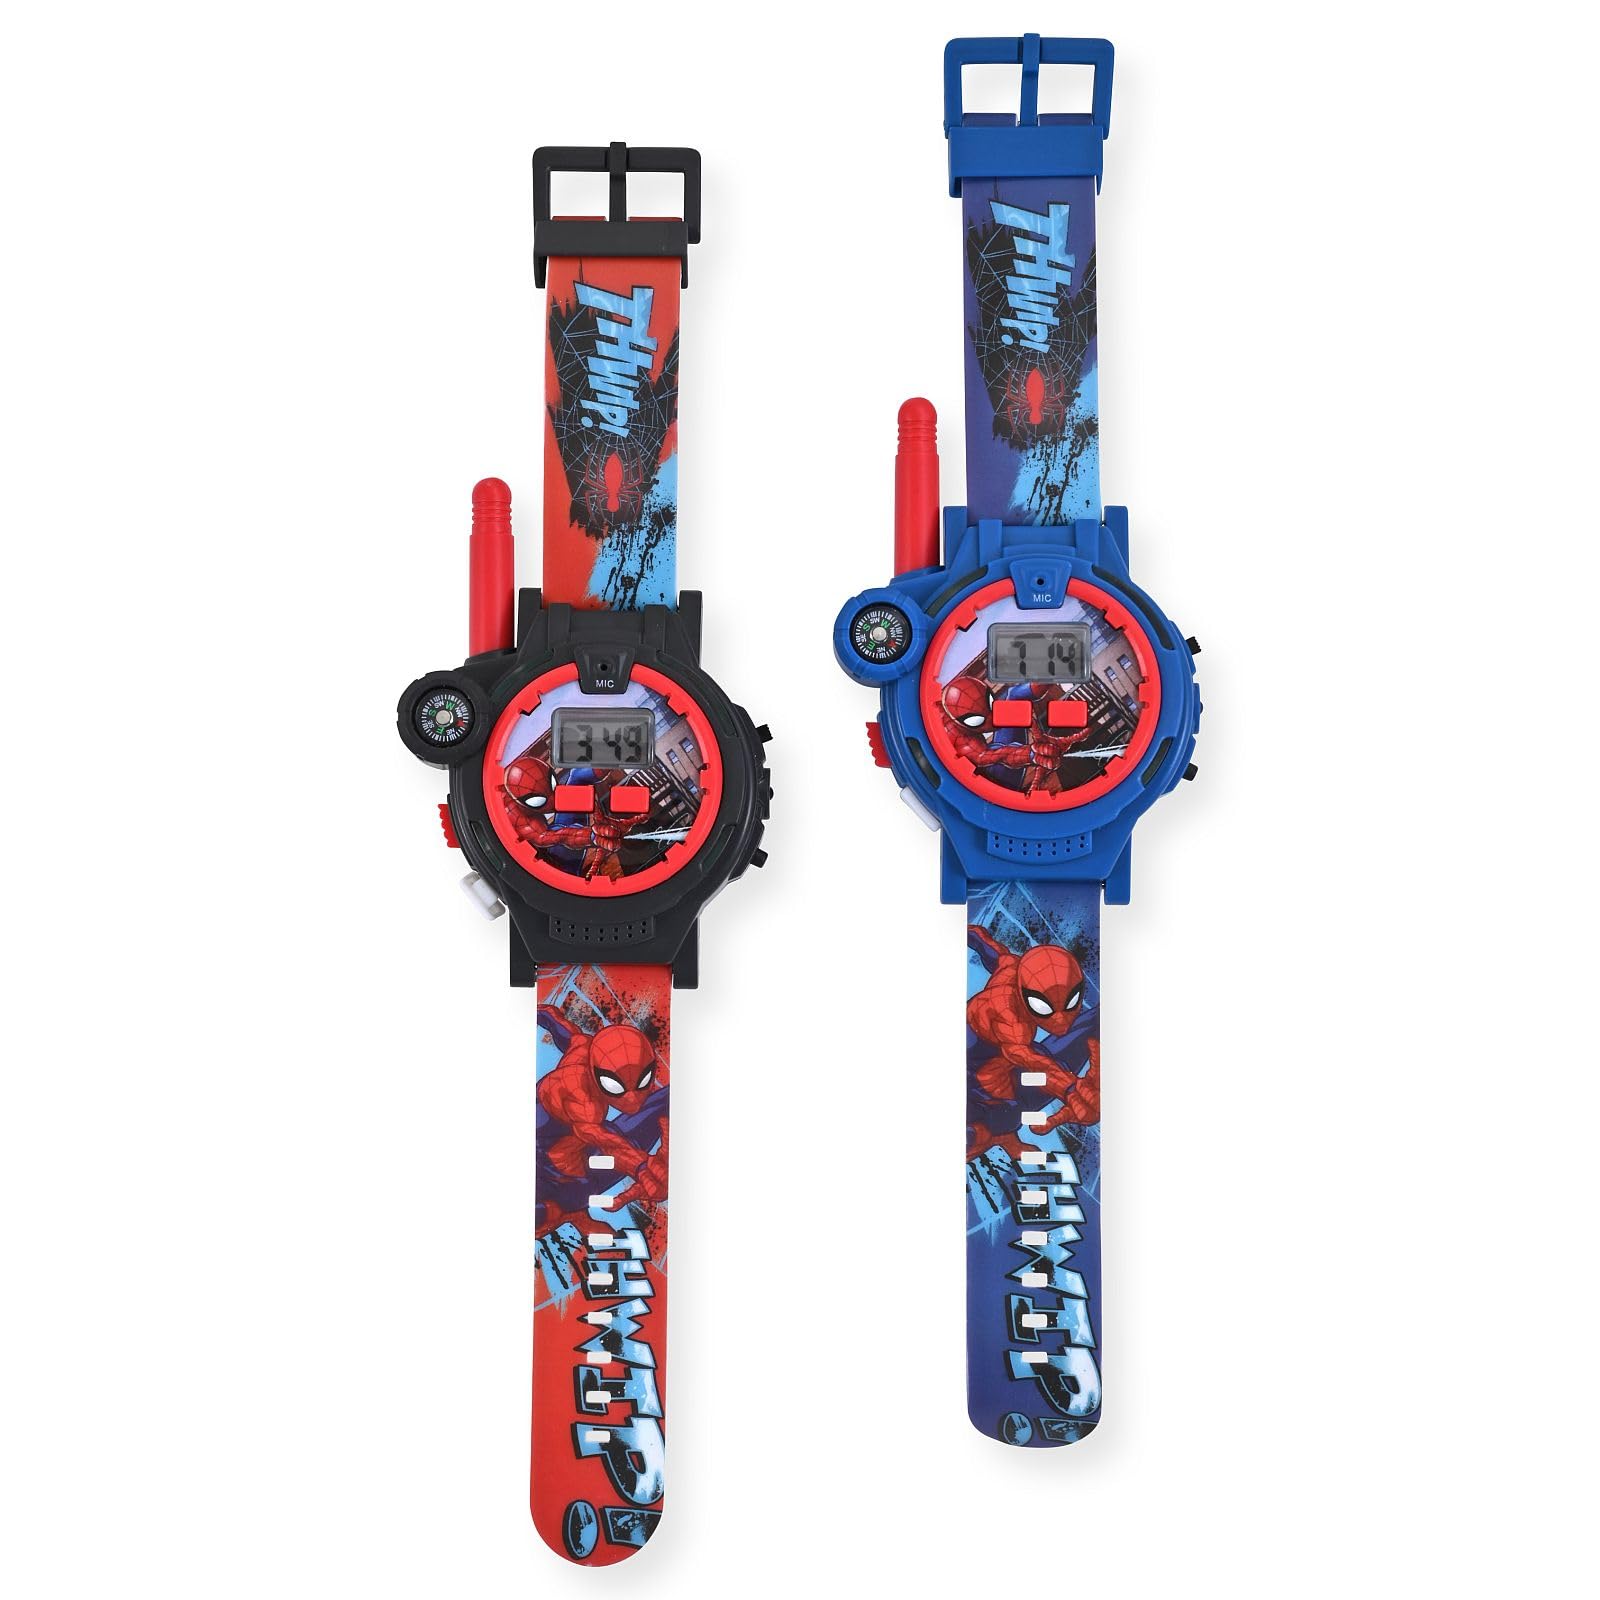 Accutime Spiderman Walkie Talkie Red and Blue Educational Digital Kids Watch Set of 2- Toy with Multicolor Strap for Girls, Boys, Toddlers - 200 Meter Long Range Children's Watch (Model: SPD40156AZ)